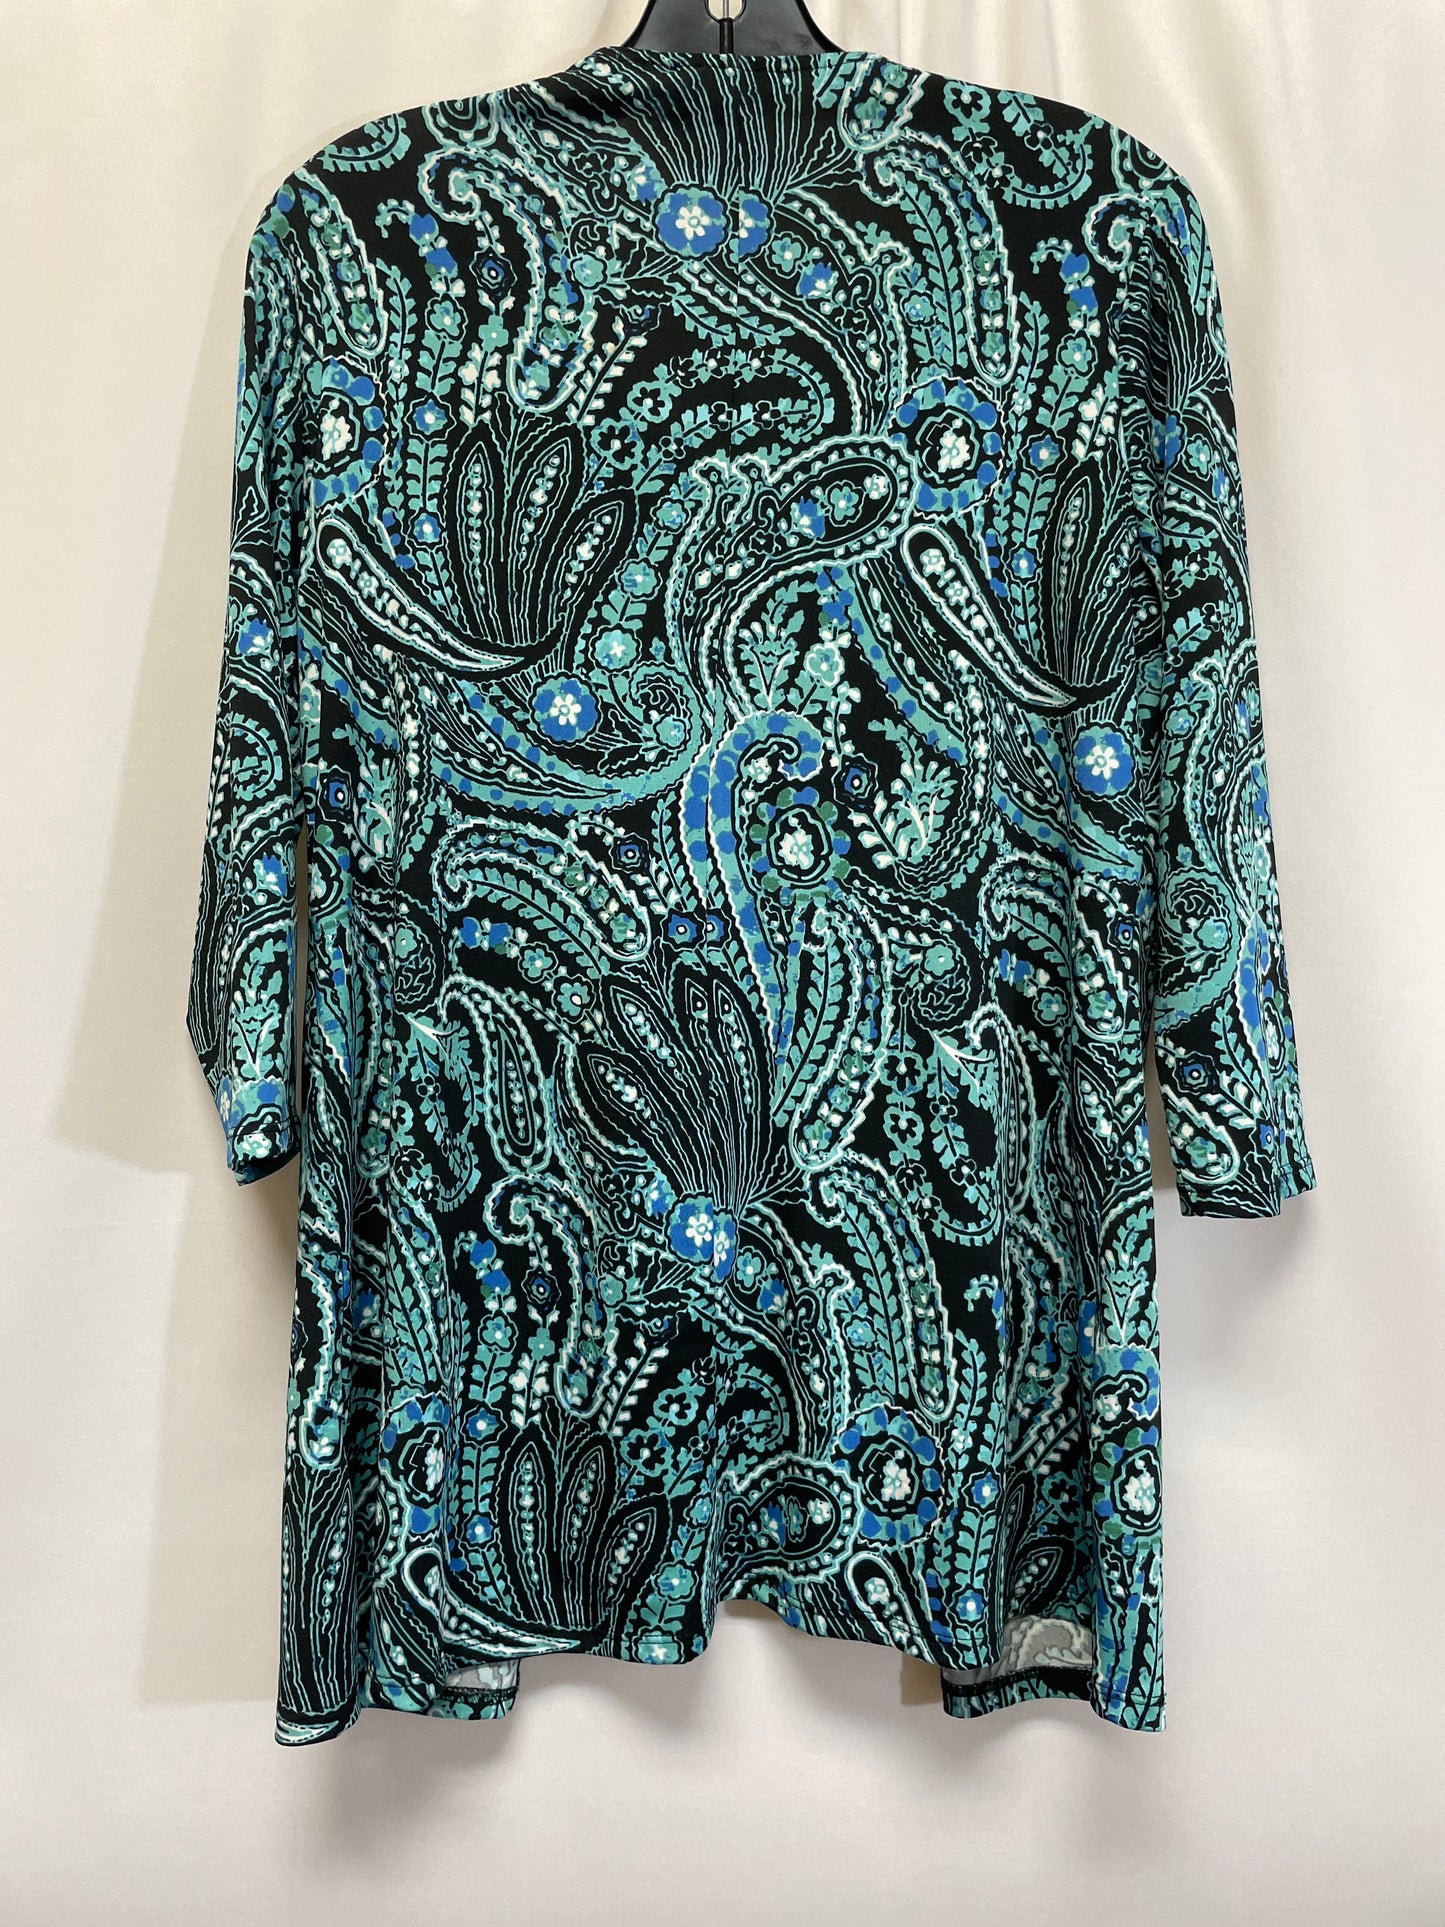 Teal Top Long Sleeve Rebecca Malone, Size M